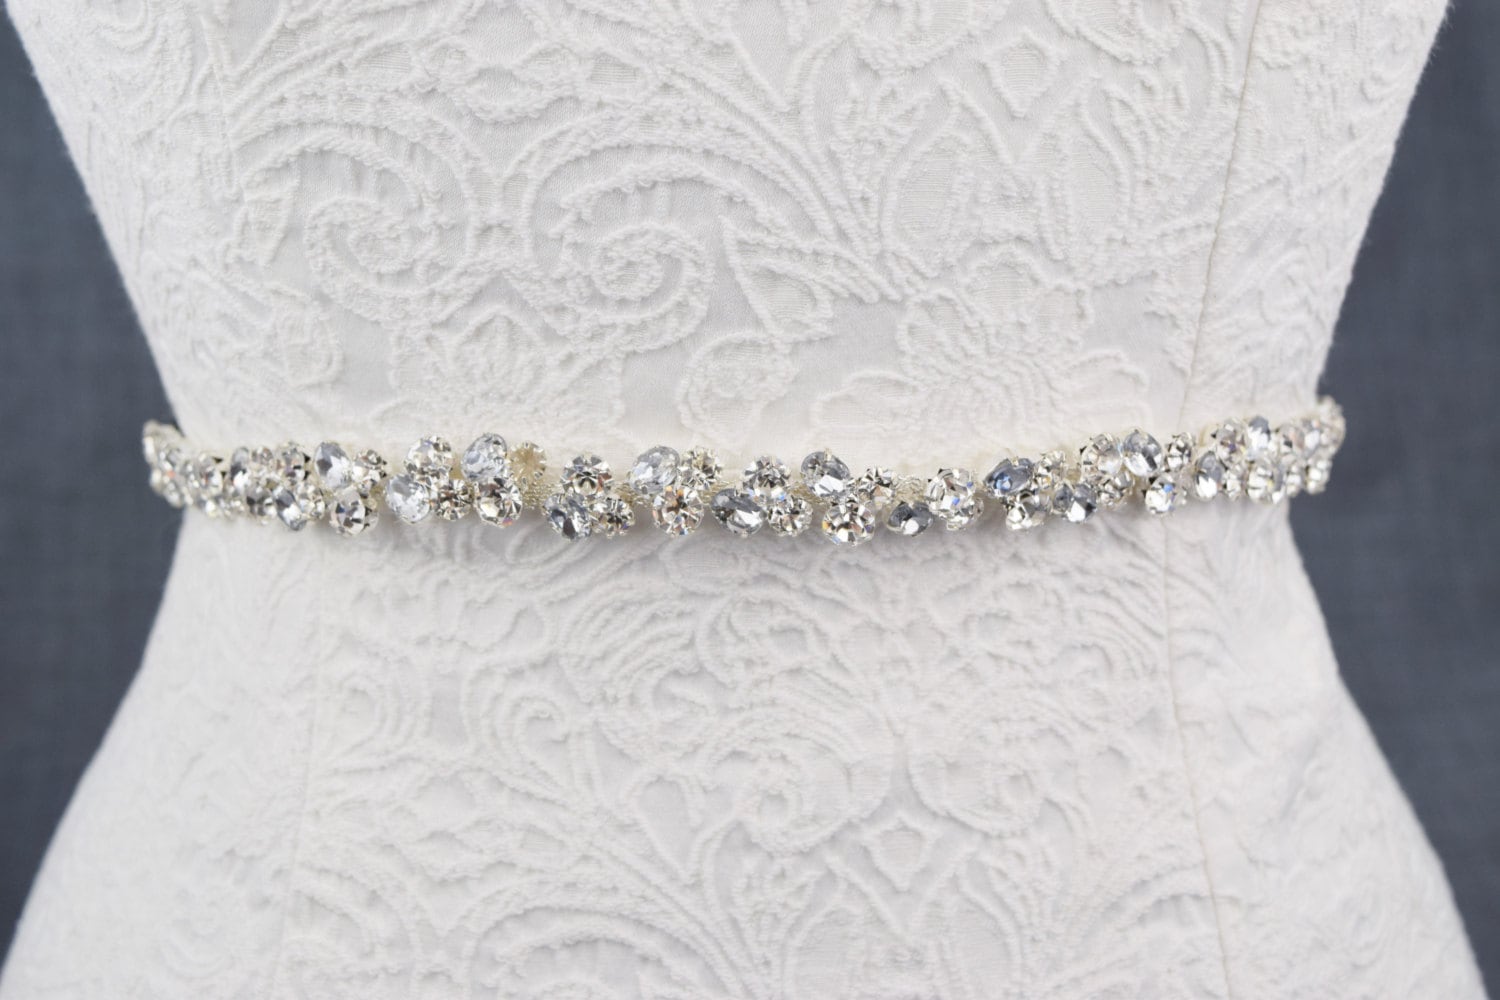 Thin Crystal Rhinestone Belt with Clasp Clear and Gray | Etsy